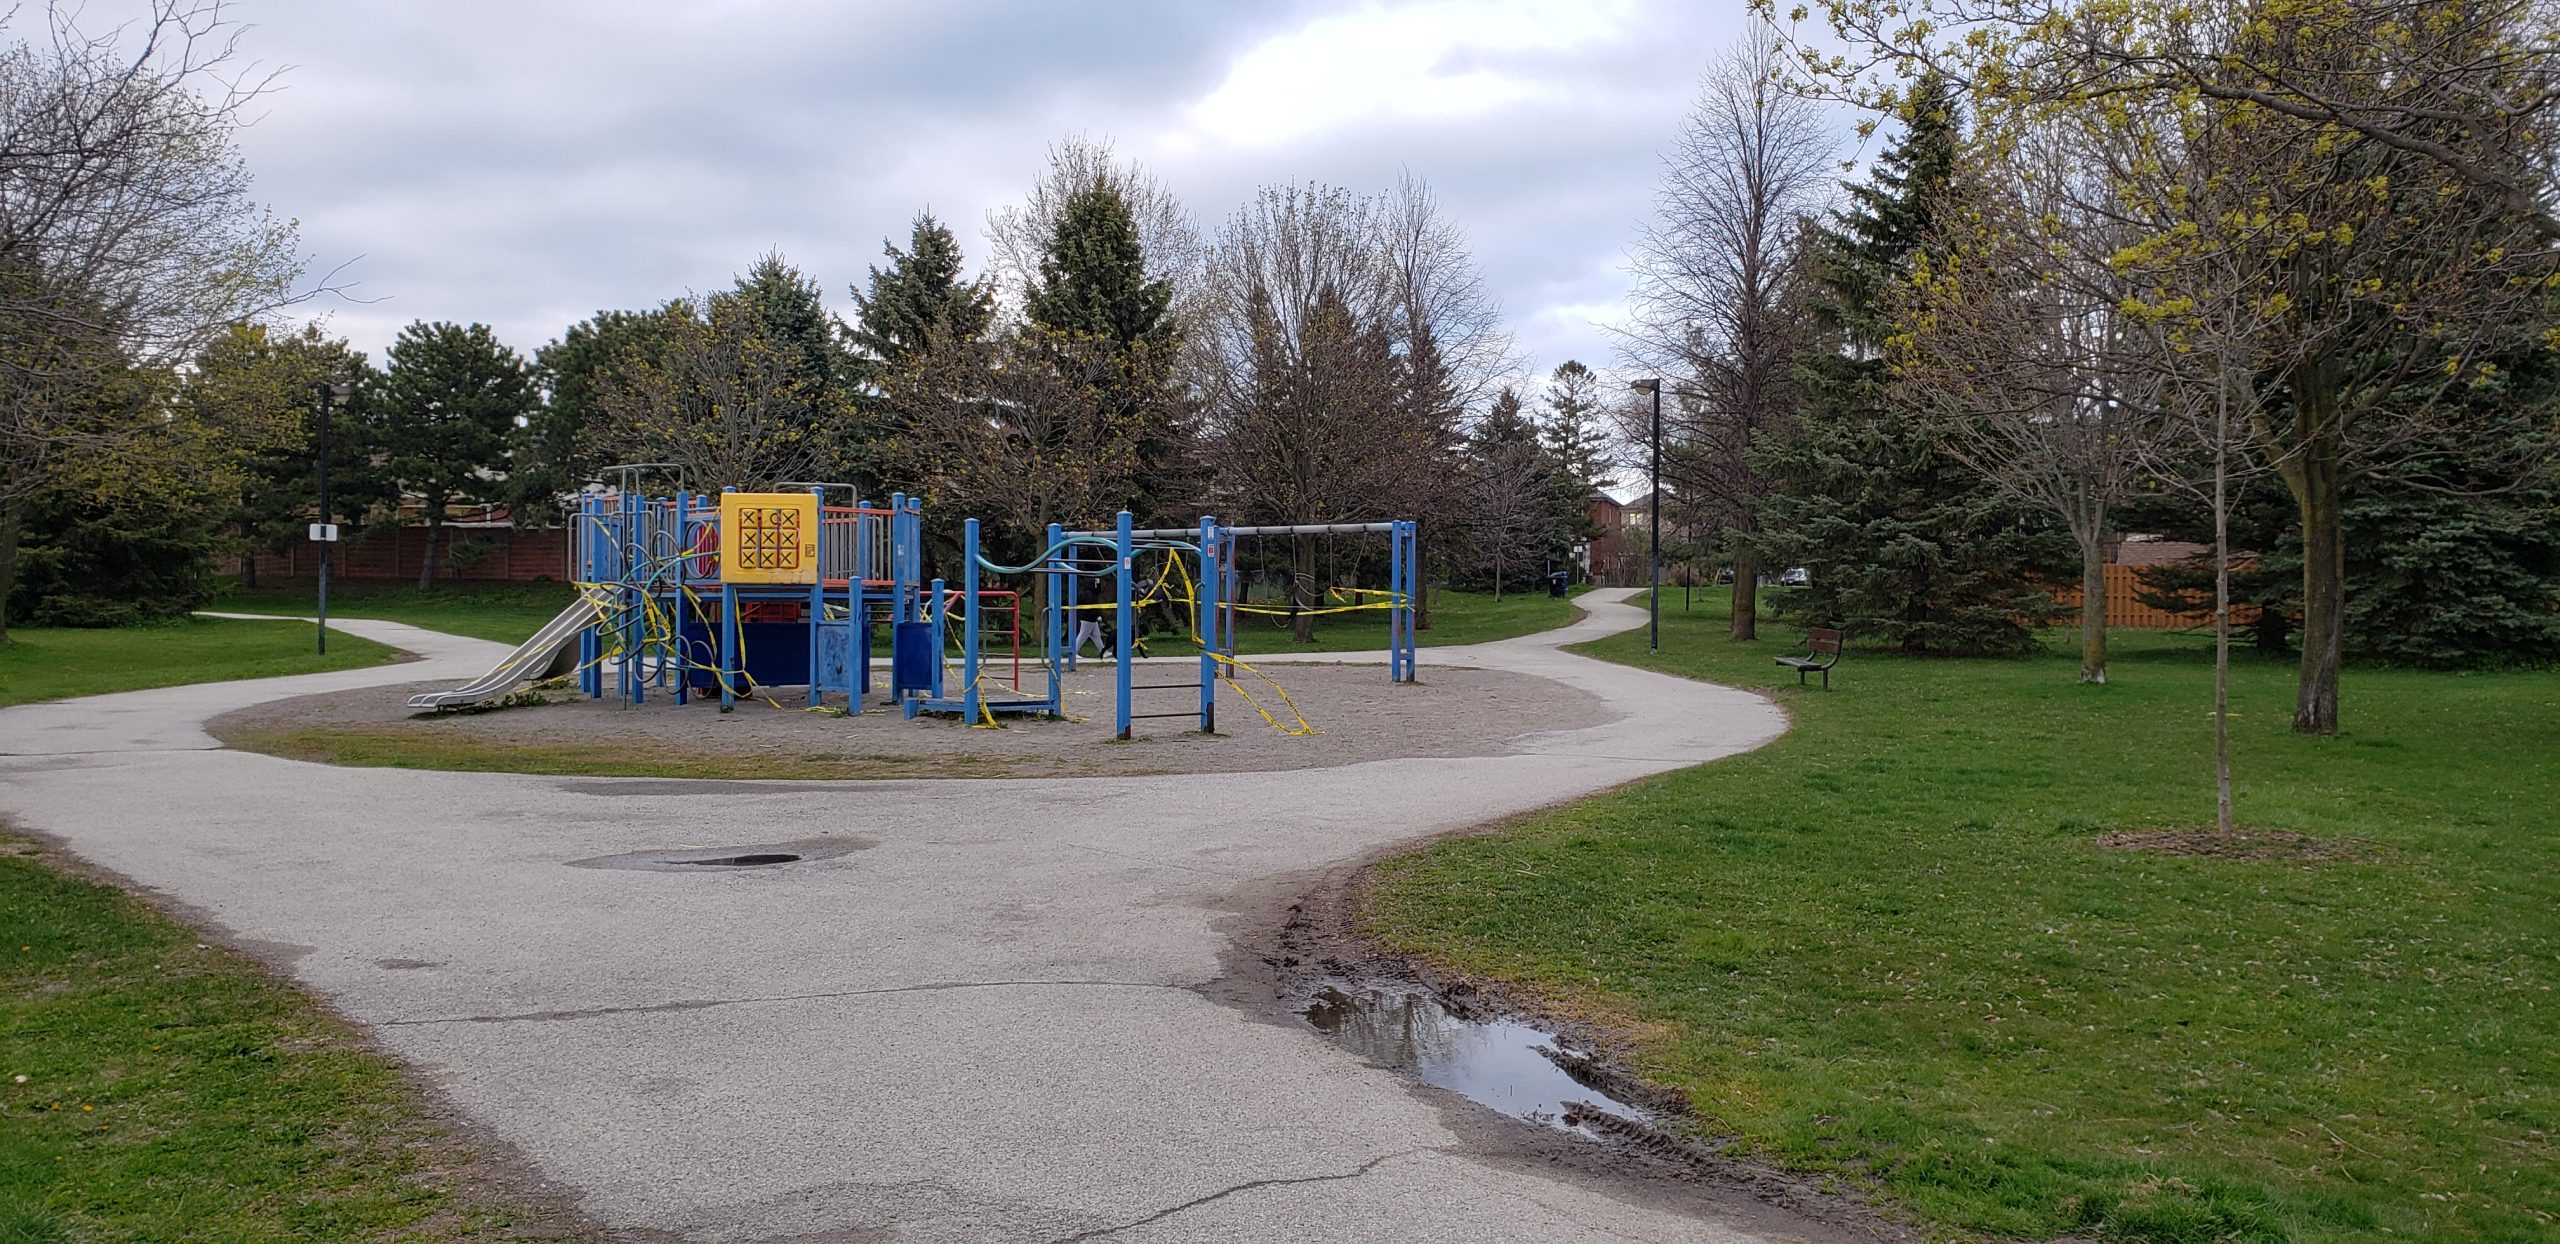 Old play equipment at Natal Park includes blue climbing structure with metal slide and monkey bars, and a swing set on a gravel play surface.